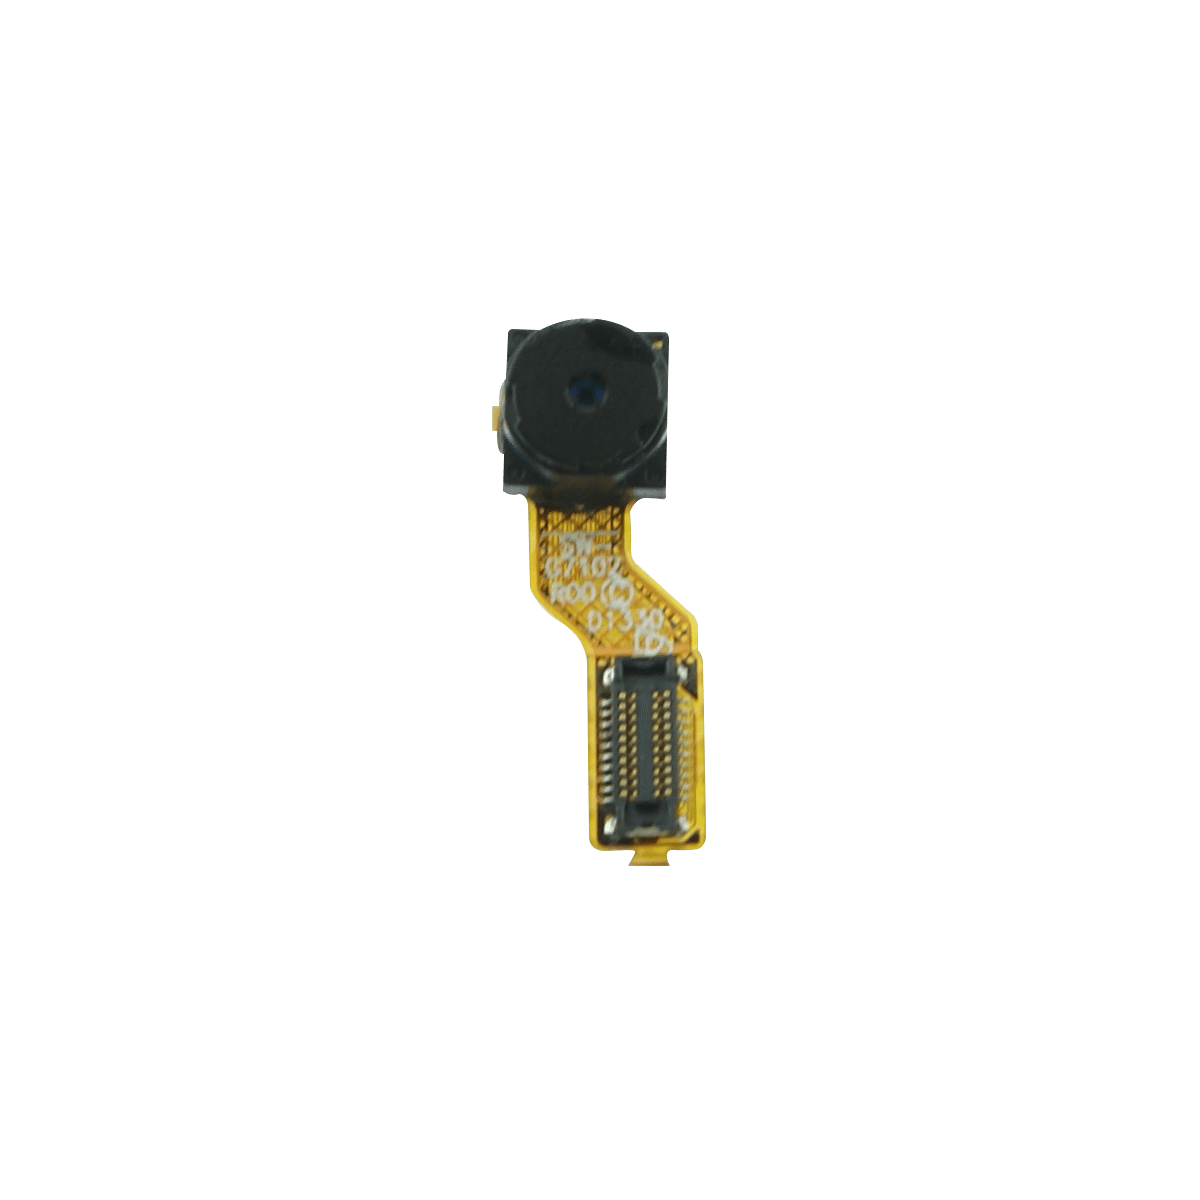 Samsung Galaxy Grand 2 G7102 G7105 Front Camera Replacement